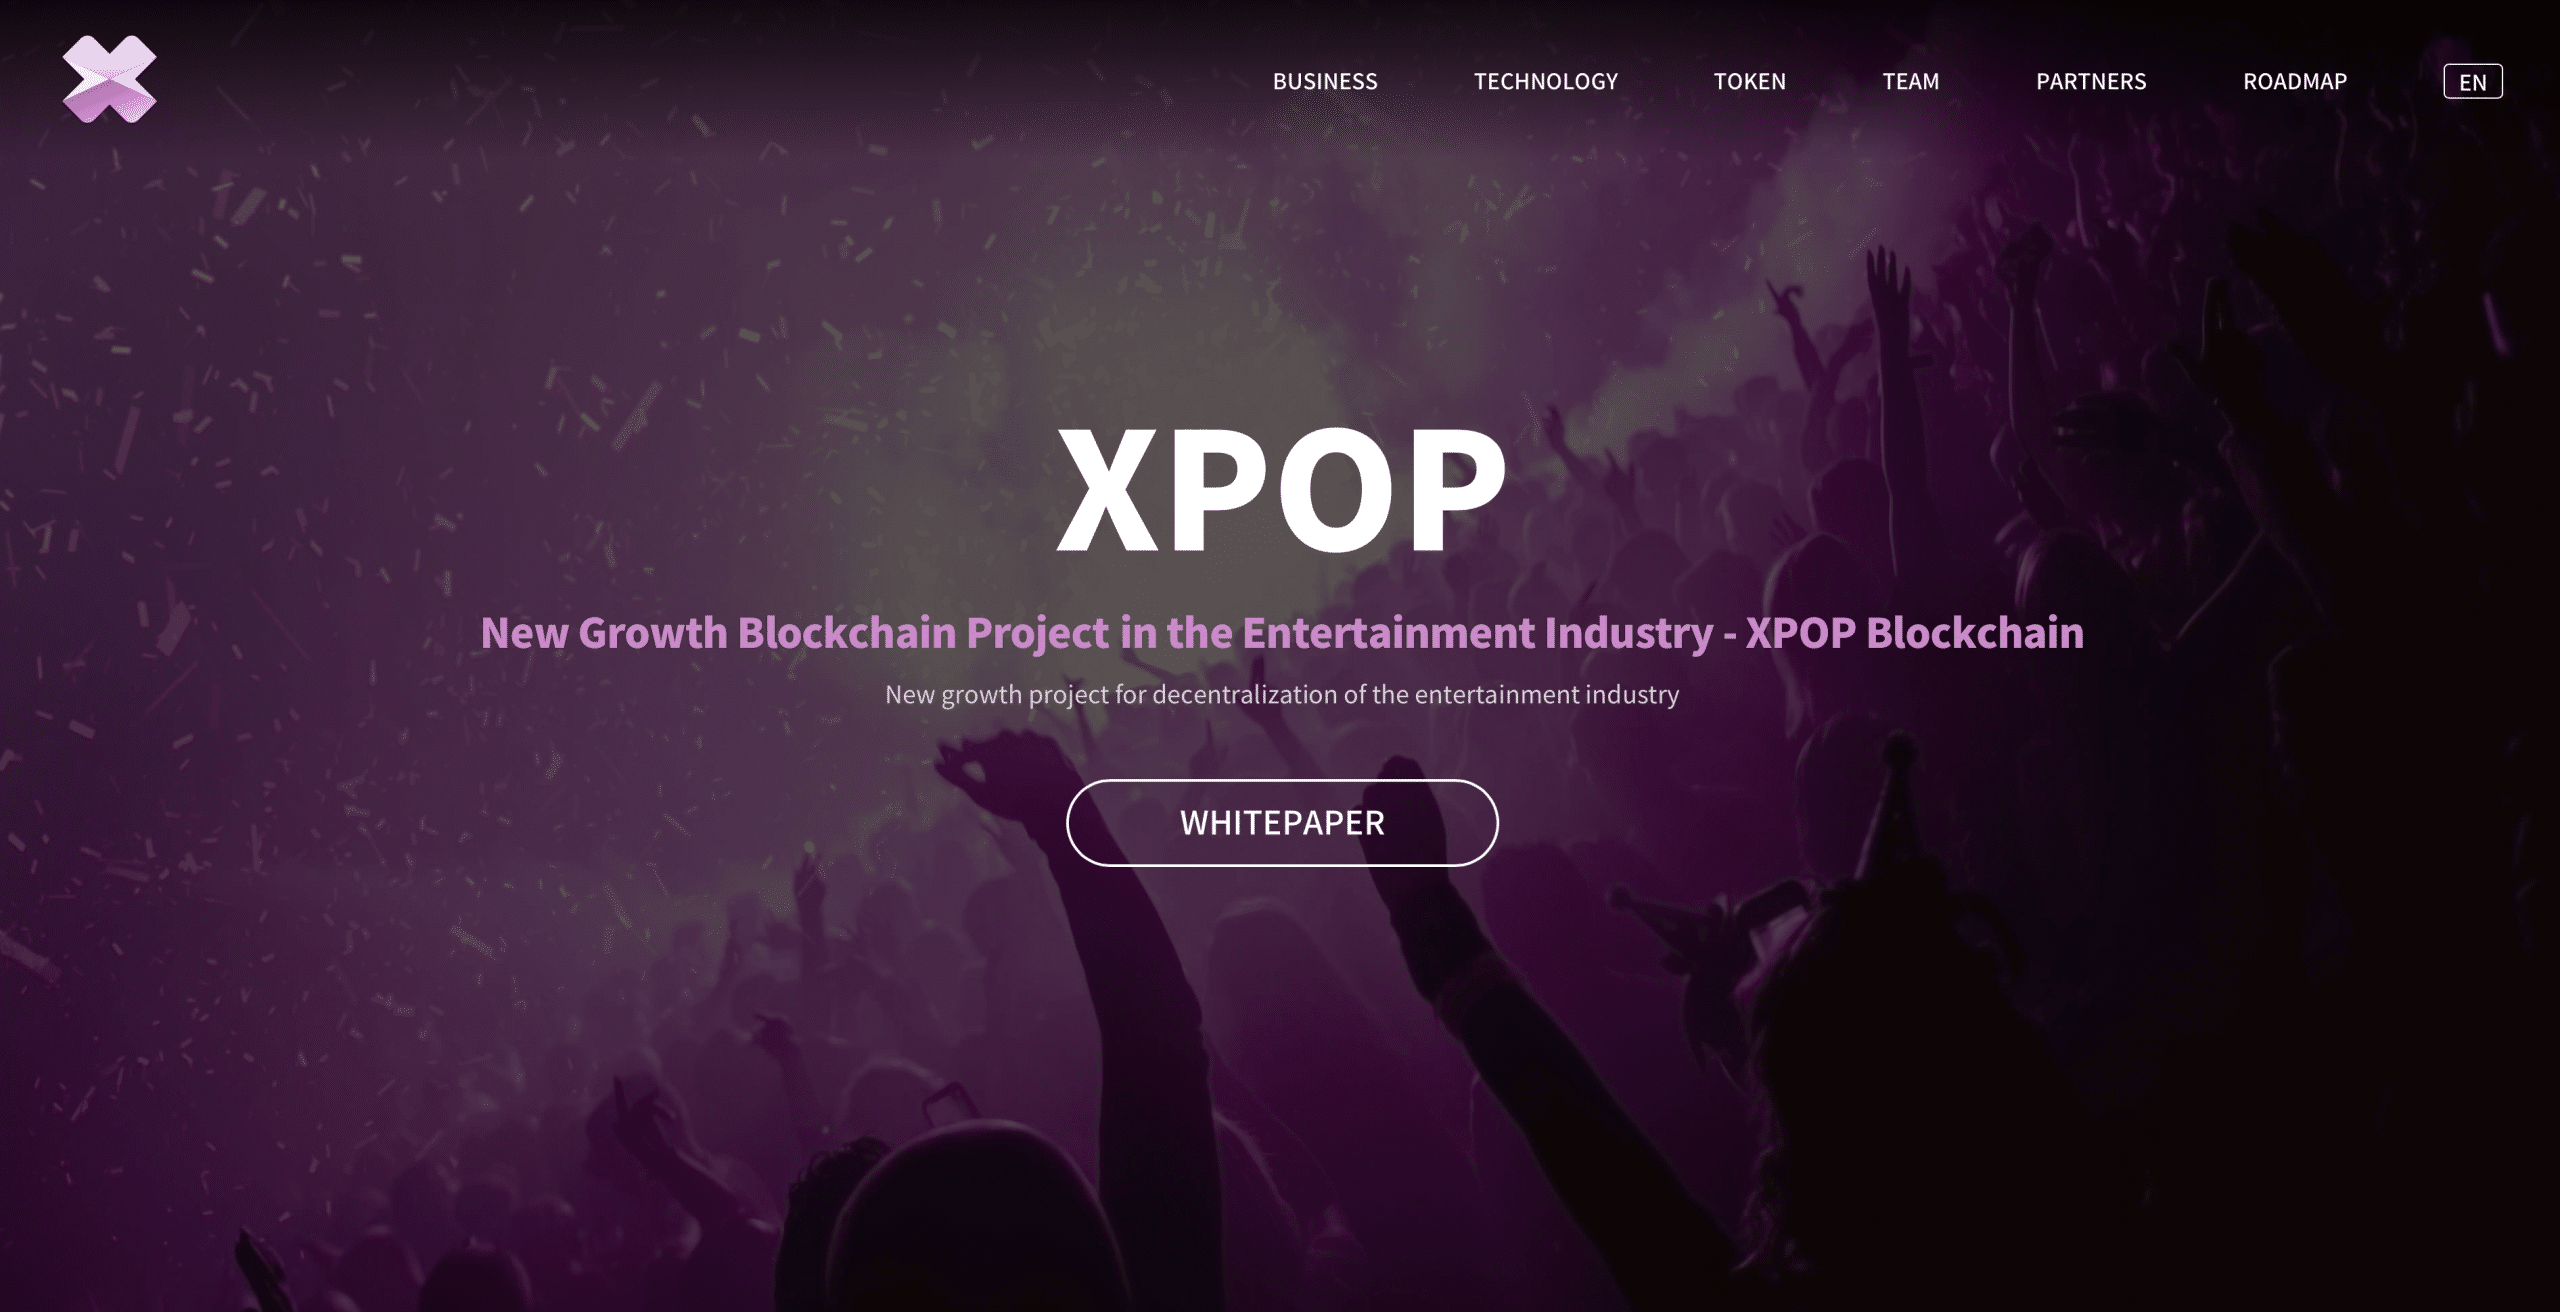 The XPOP website ahead of its launch of a modern NFT marketplace